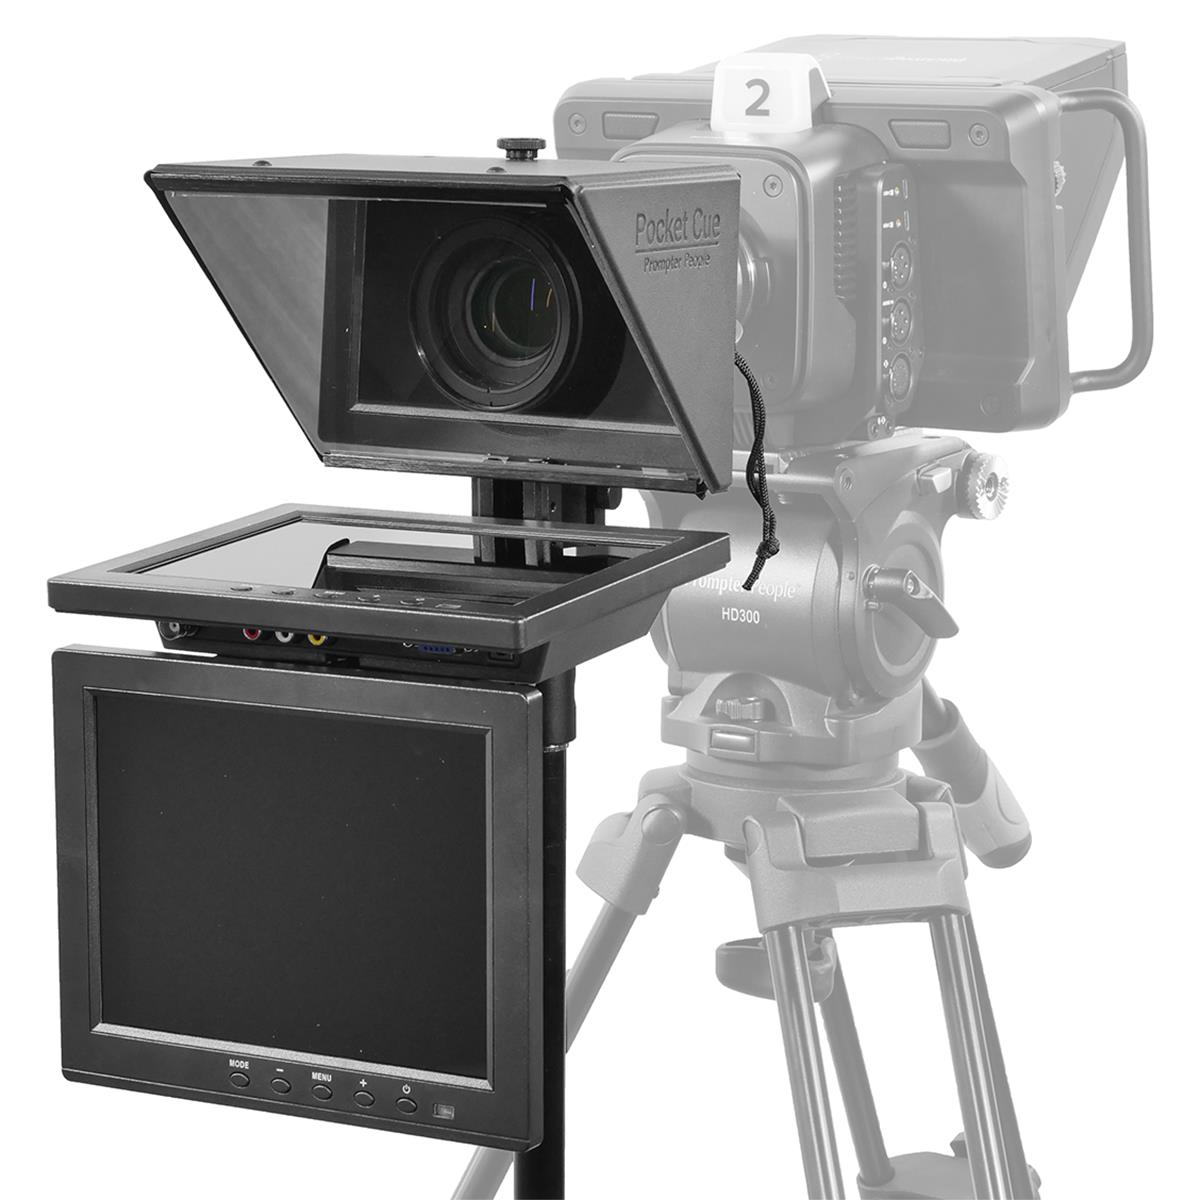 Image of Prompter People Pocket Cue V2 Pro Teleprompter with Monitor and Freestanding Kit